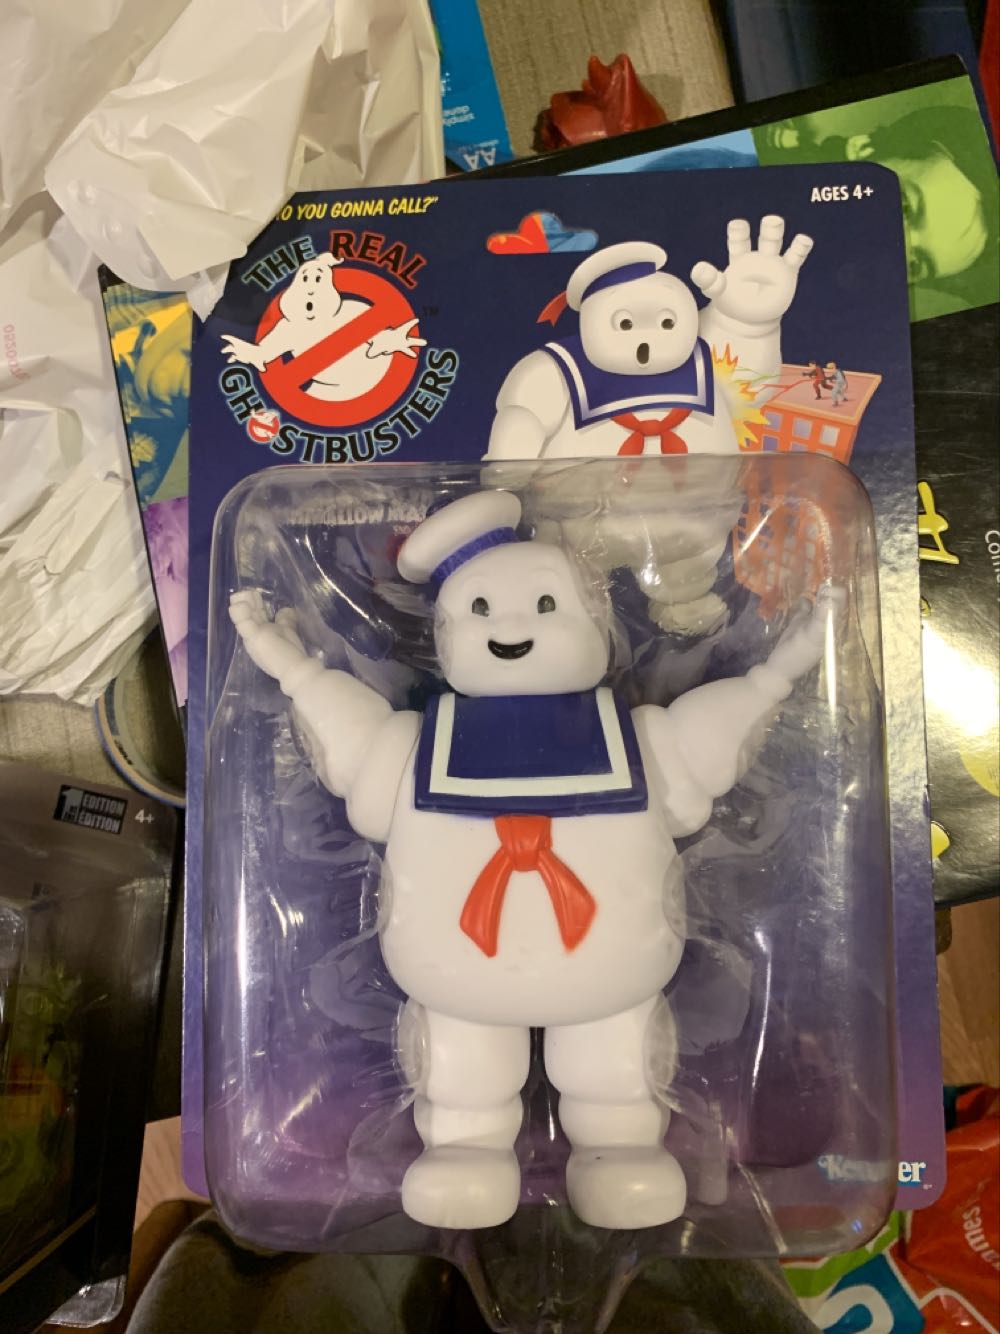 Ghostbusters stay Puff marshmallow Man who you gonna call  action figure collectible - Main Image 1